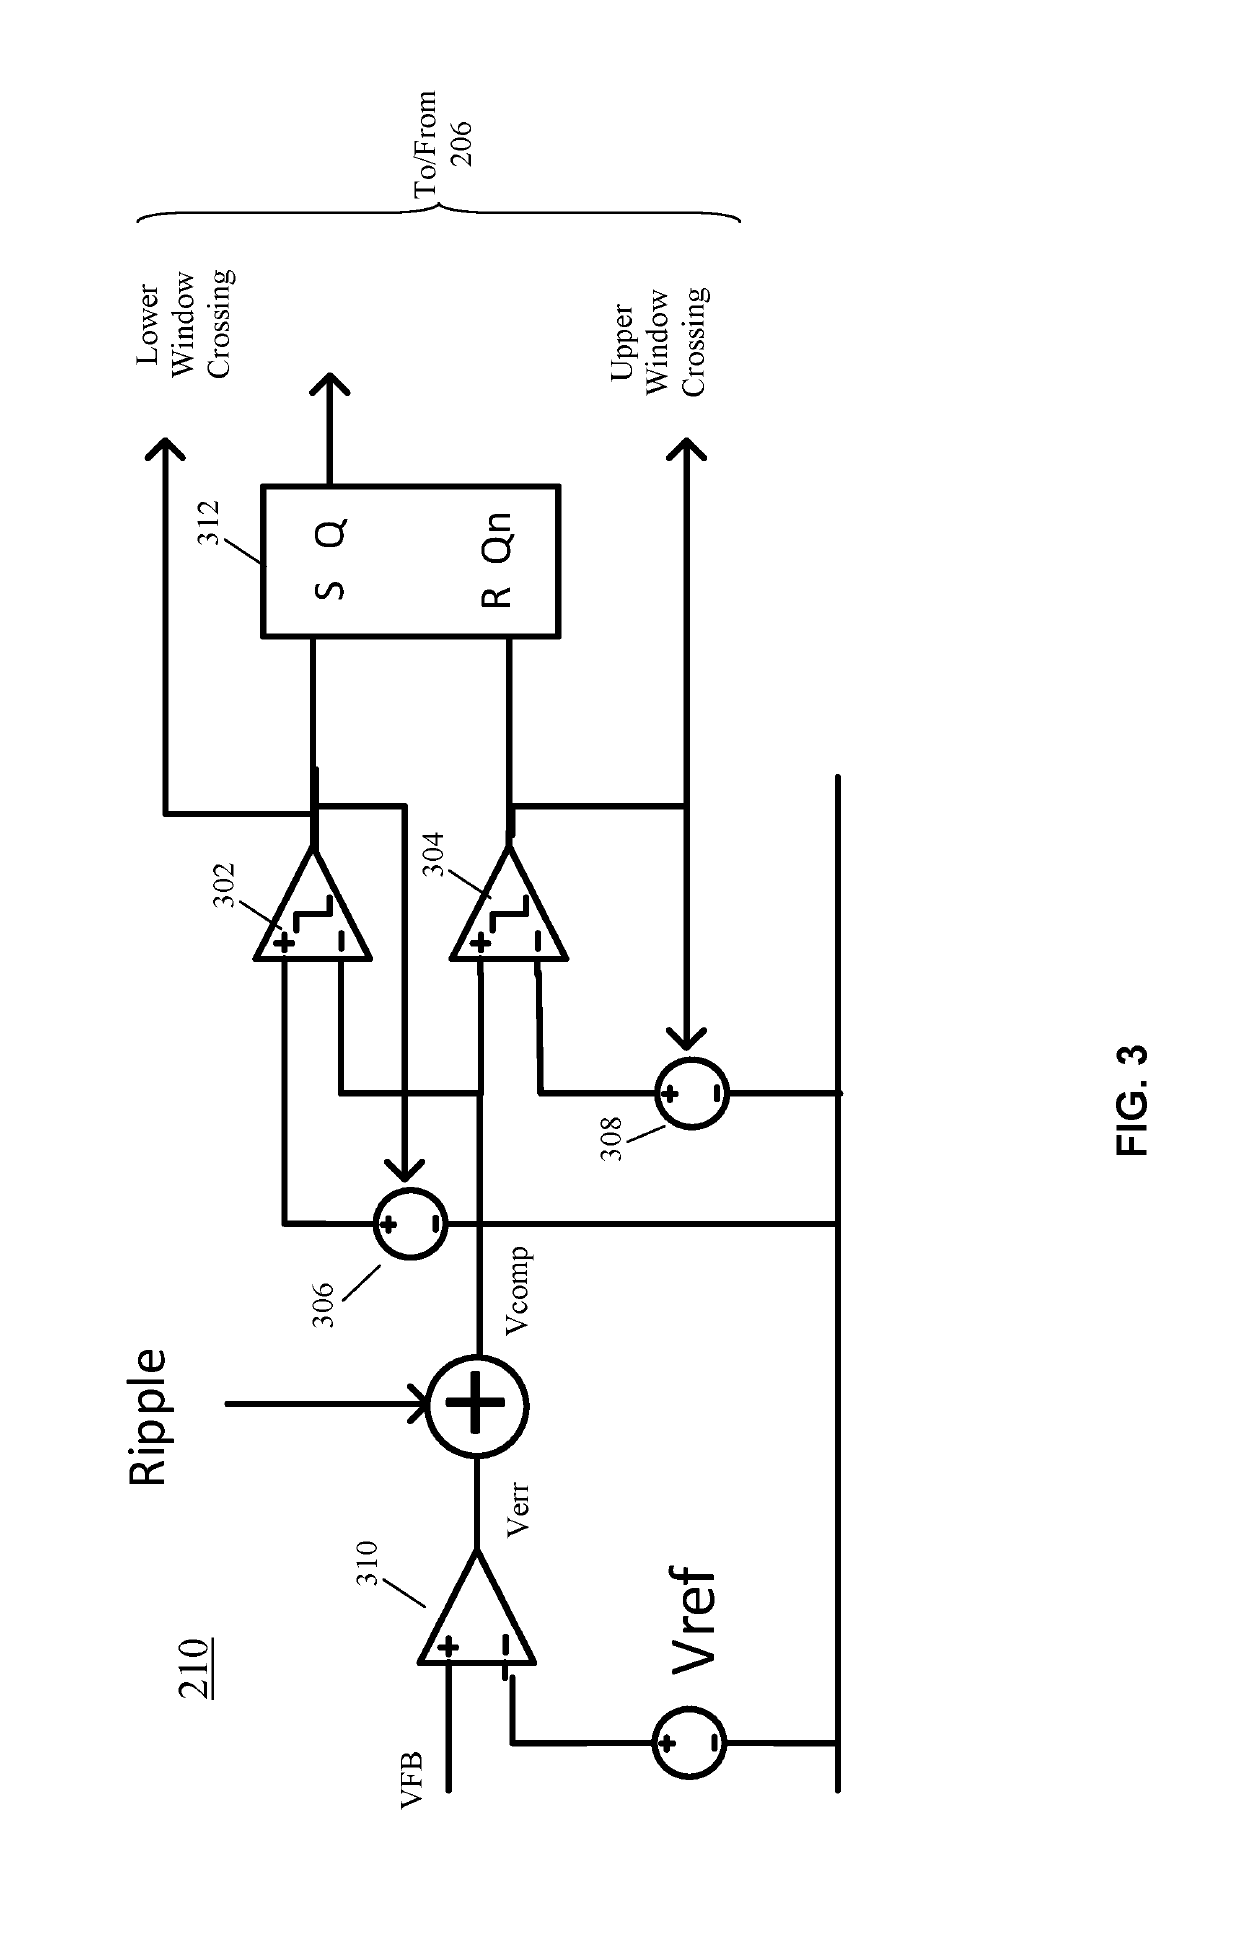 Synthetic ripple generator for low power hysteretic buck-boost dc-dc controller